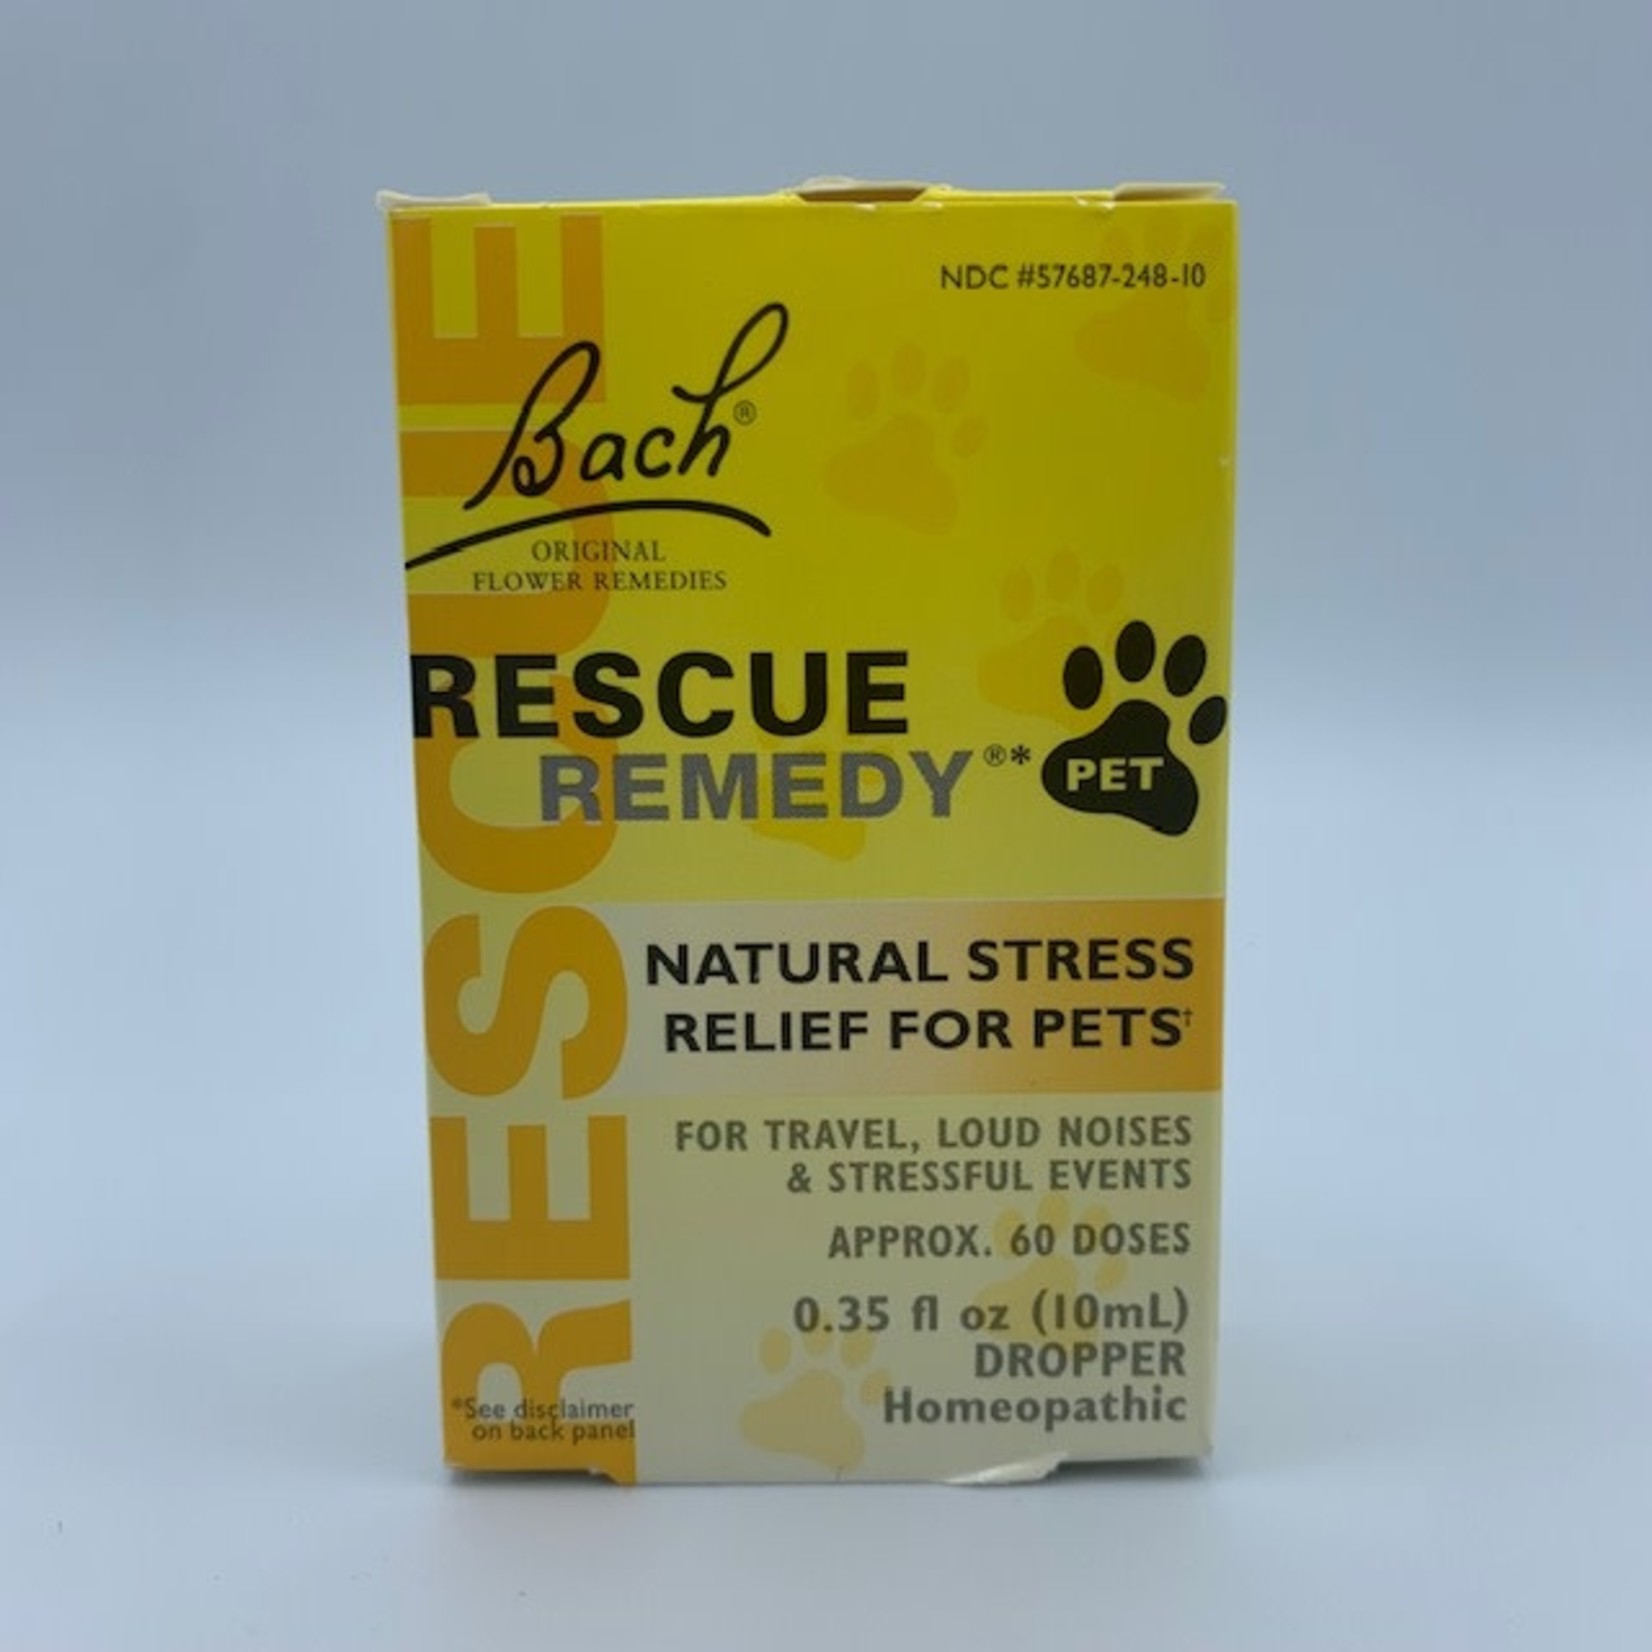 Bach Flower Remedies: Rescue Remedy Natural Stress Relief for Pets